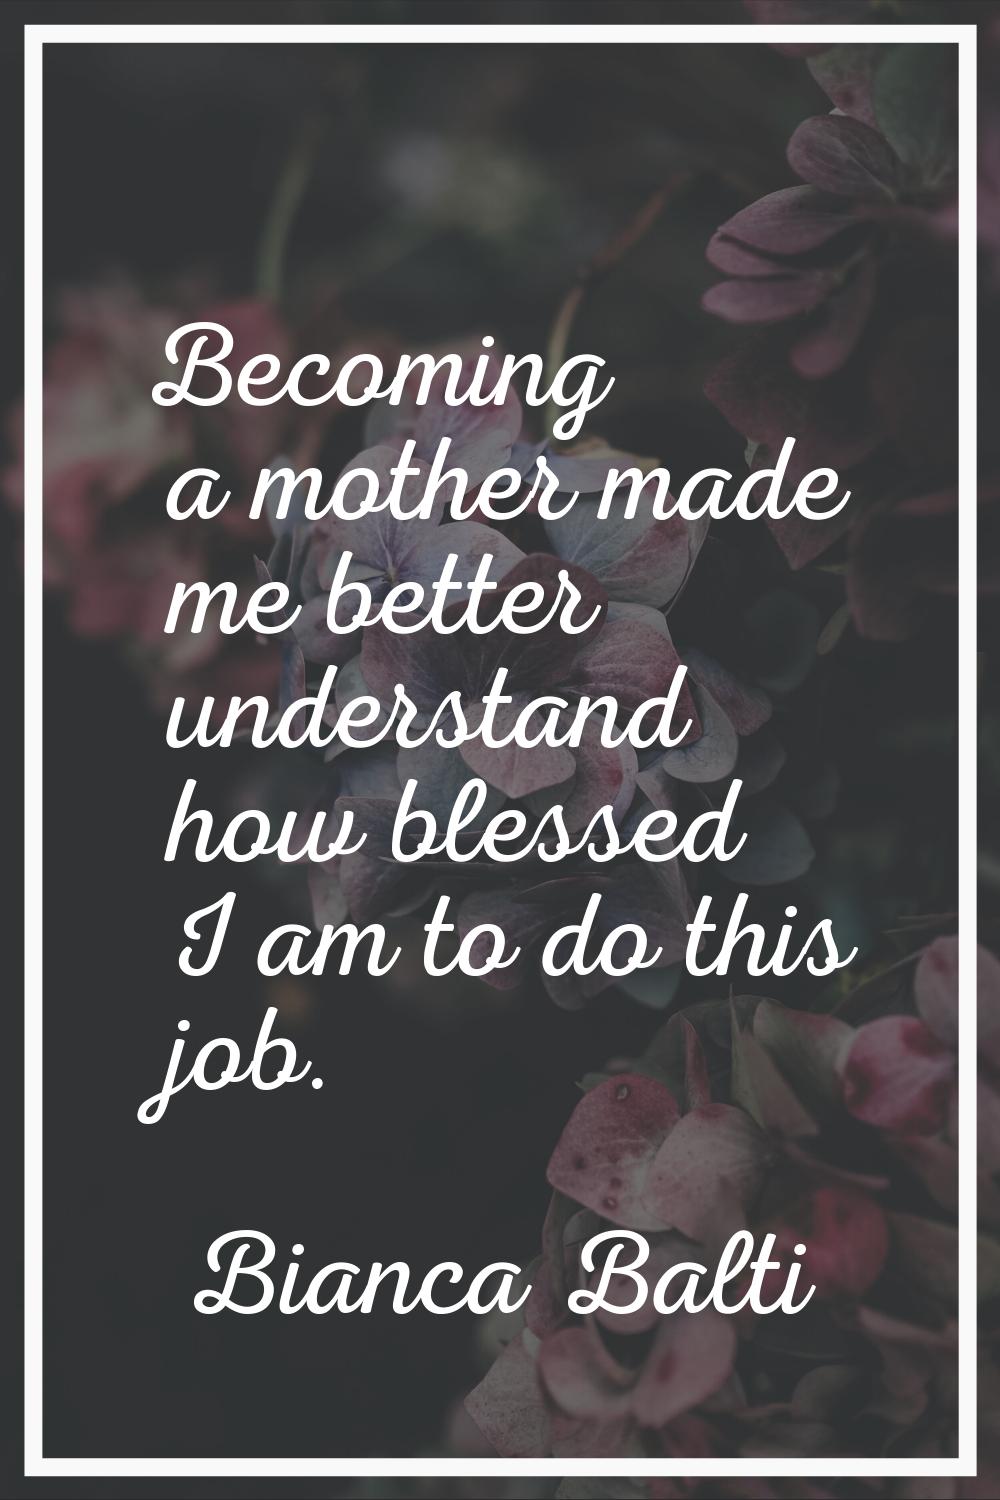 Becoming a mother made me better understand how blessed I am to do this job.